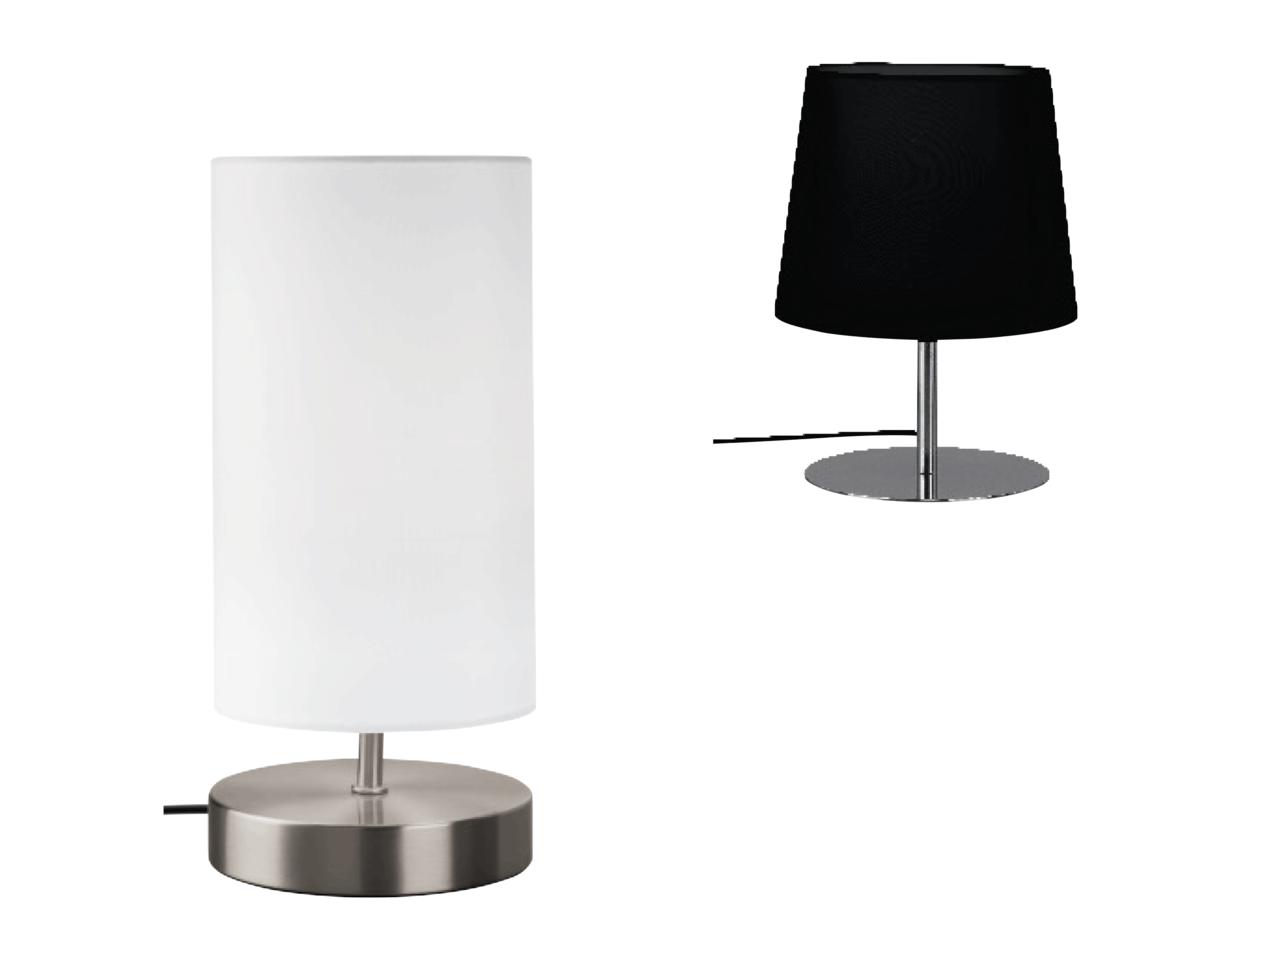 Dwang Automatisering rietje LIVARNO LUX LED Desk Lamp - Lidl — Ireland - Specials archive